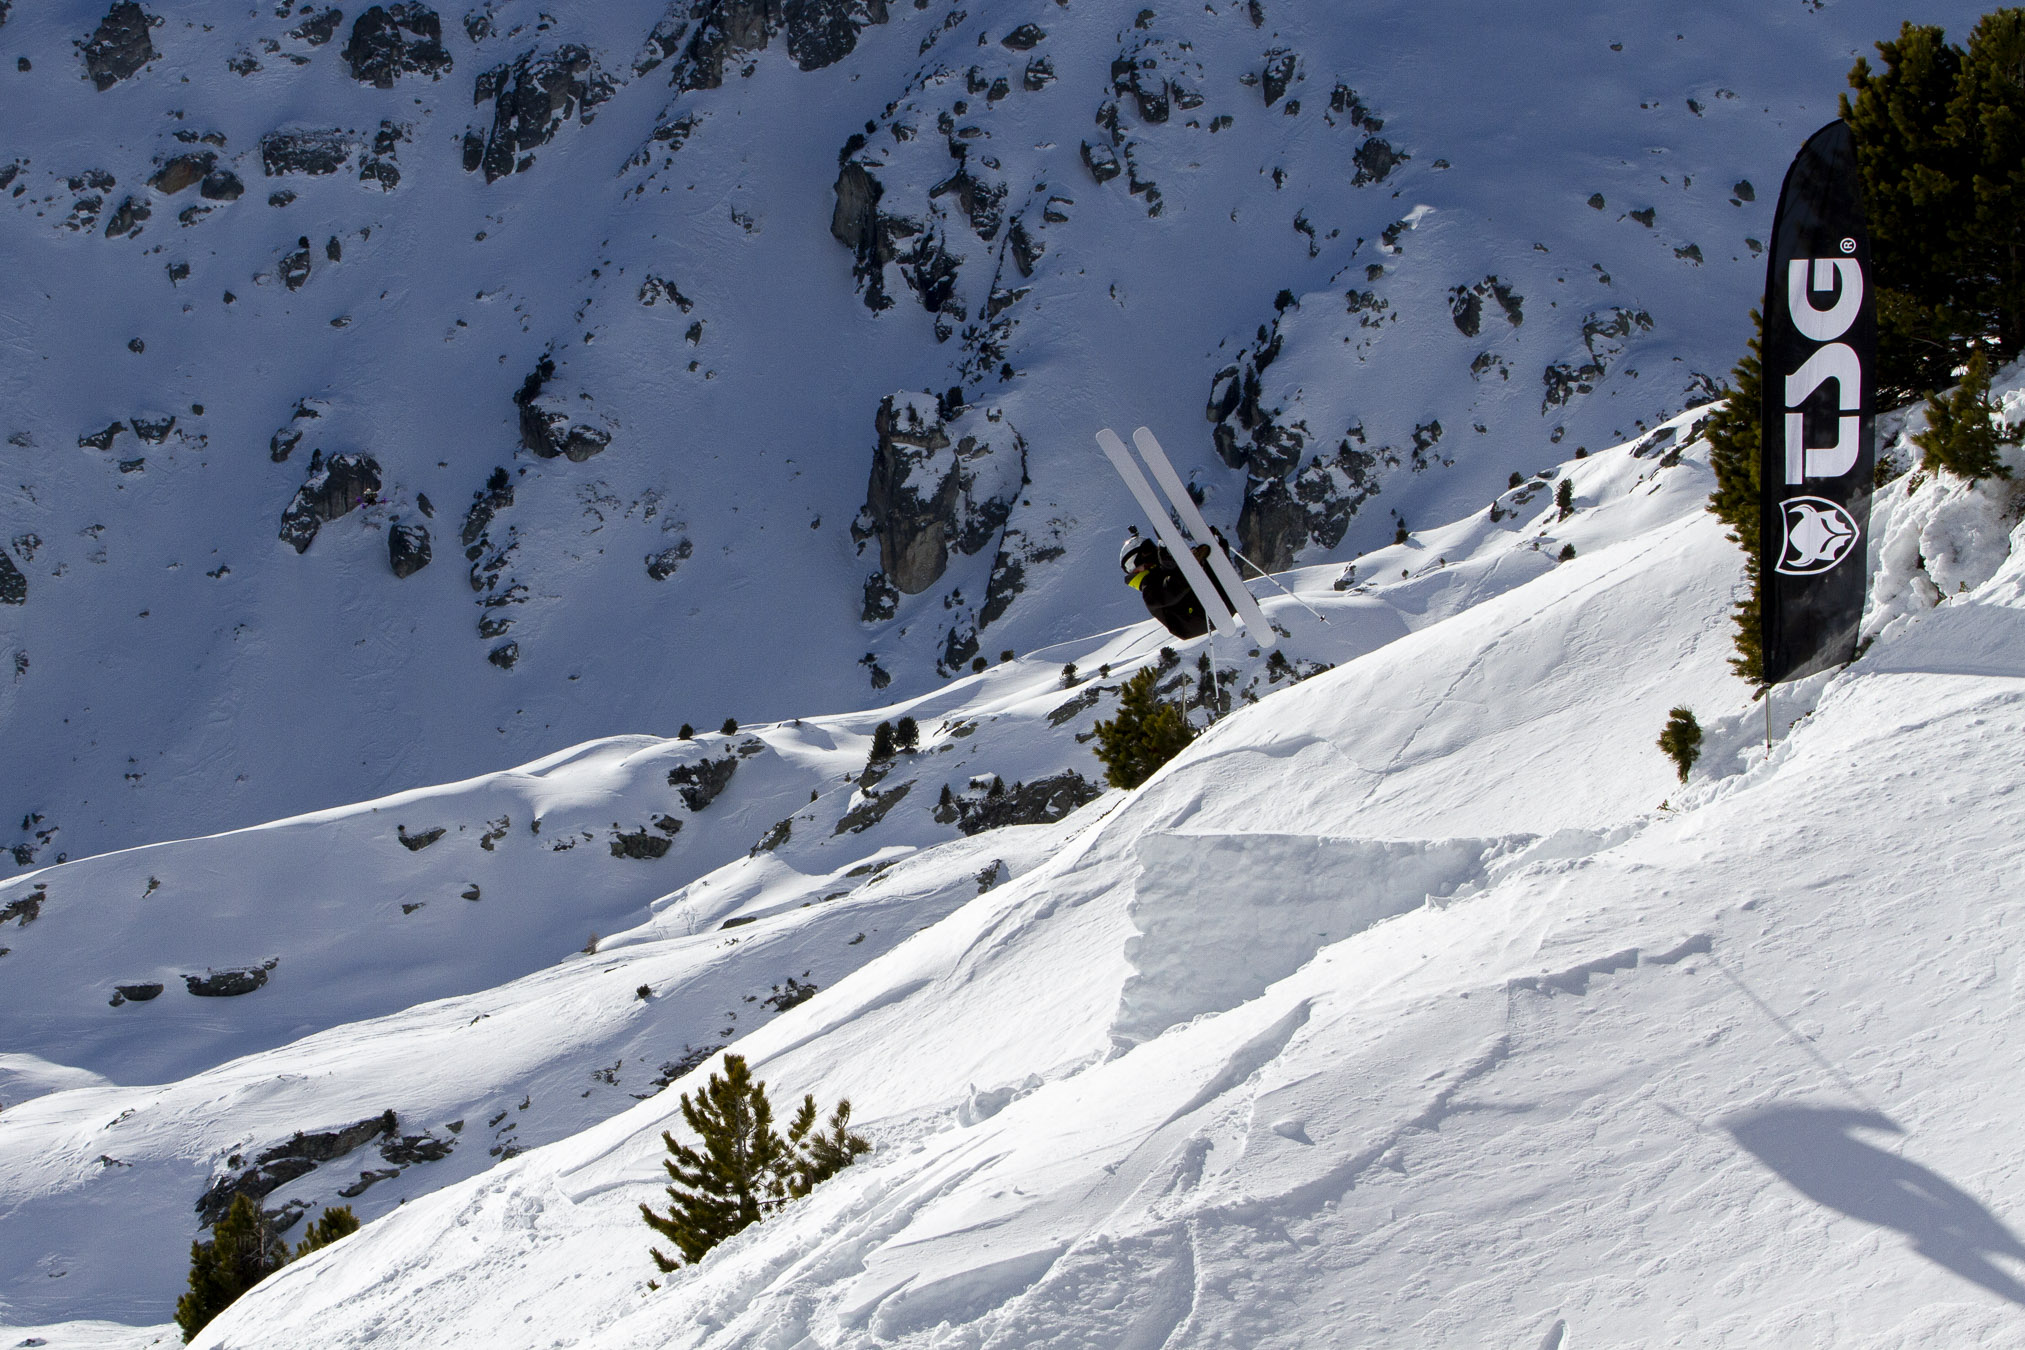 Tanner Hall at the 2022 Nendaz Backcountry Invitational